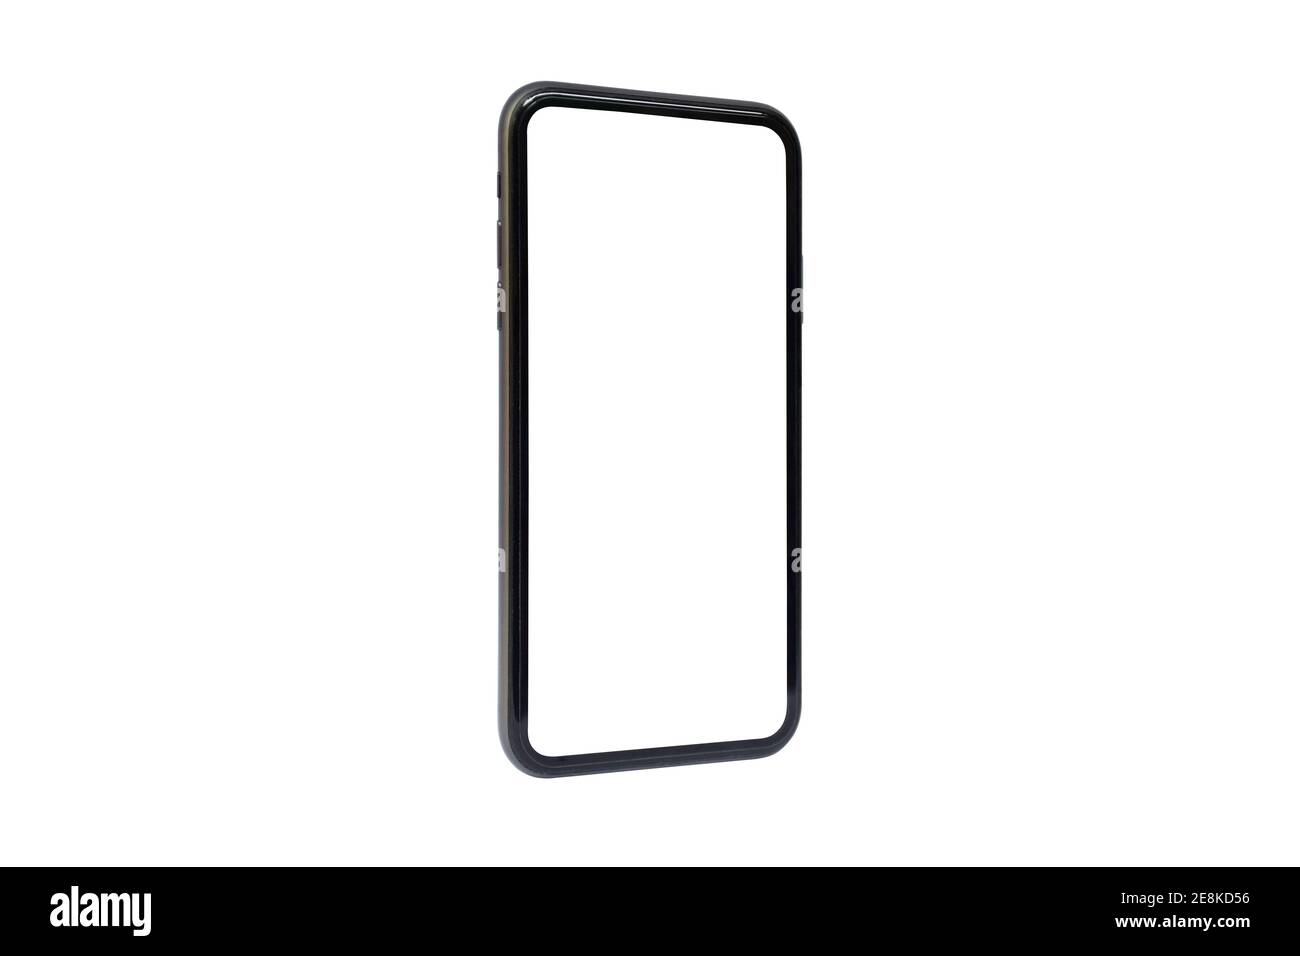 Side view or Perspective view of Smartphone device and blank touching screen for Video call,Work from home concept.isolated with clipping path on whit Stock Photo